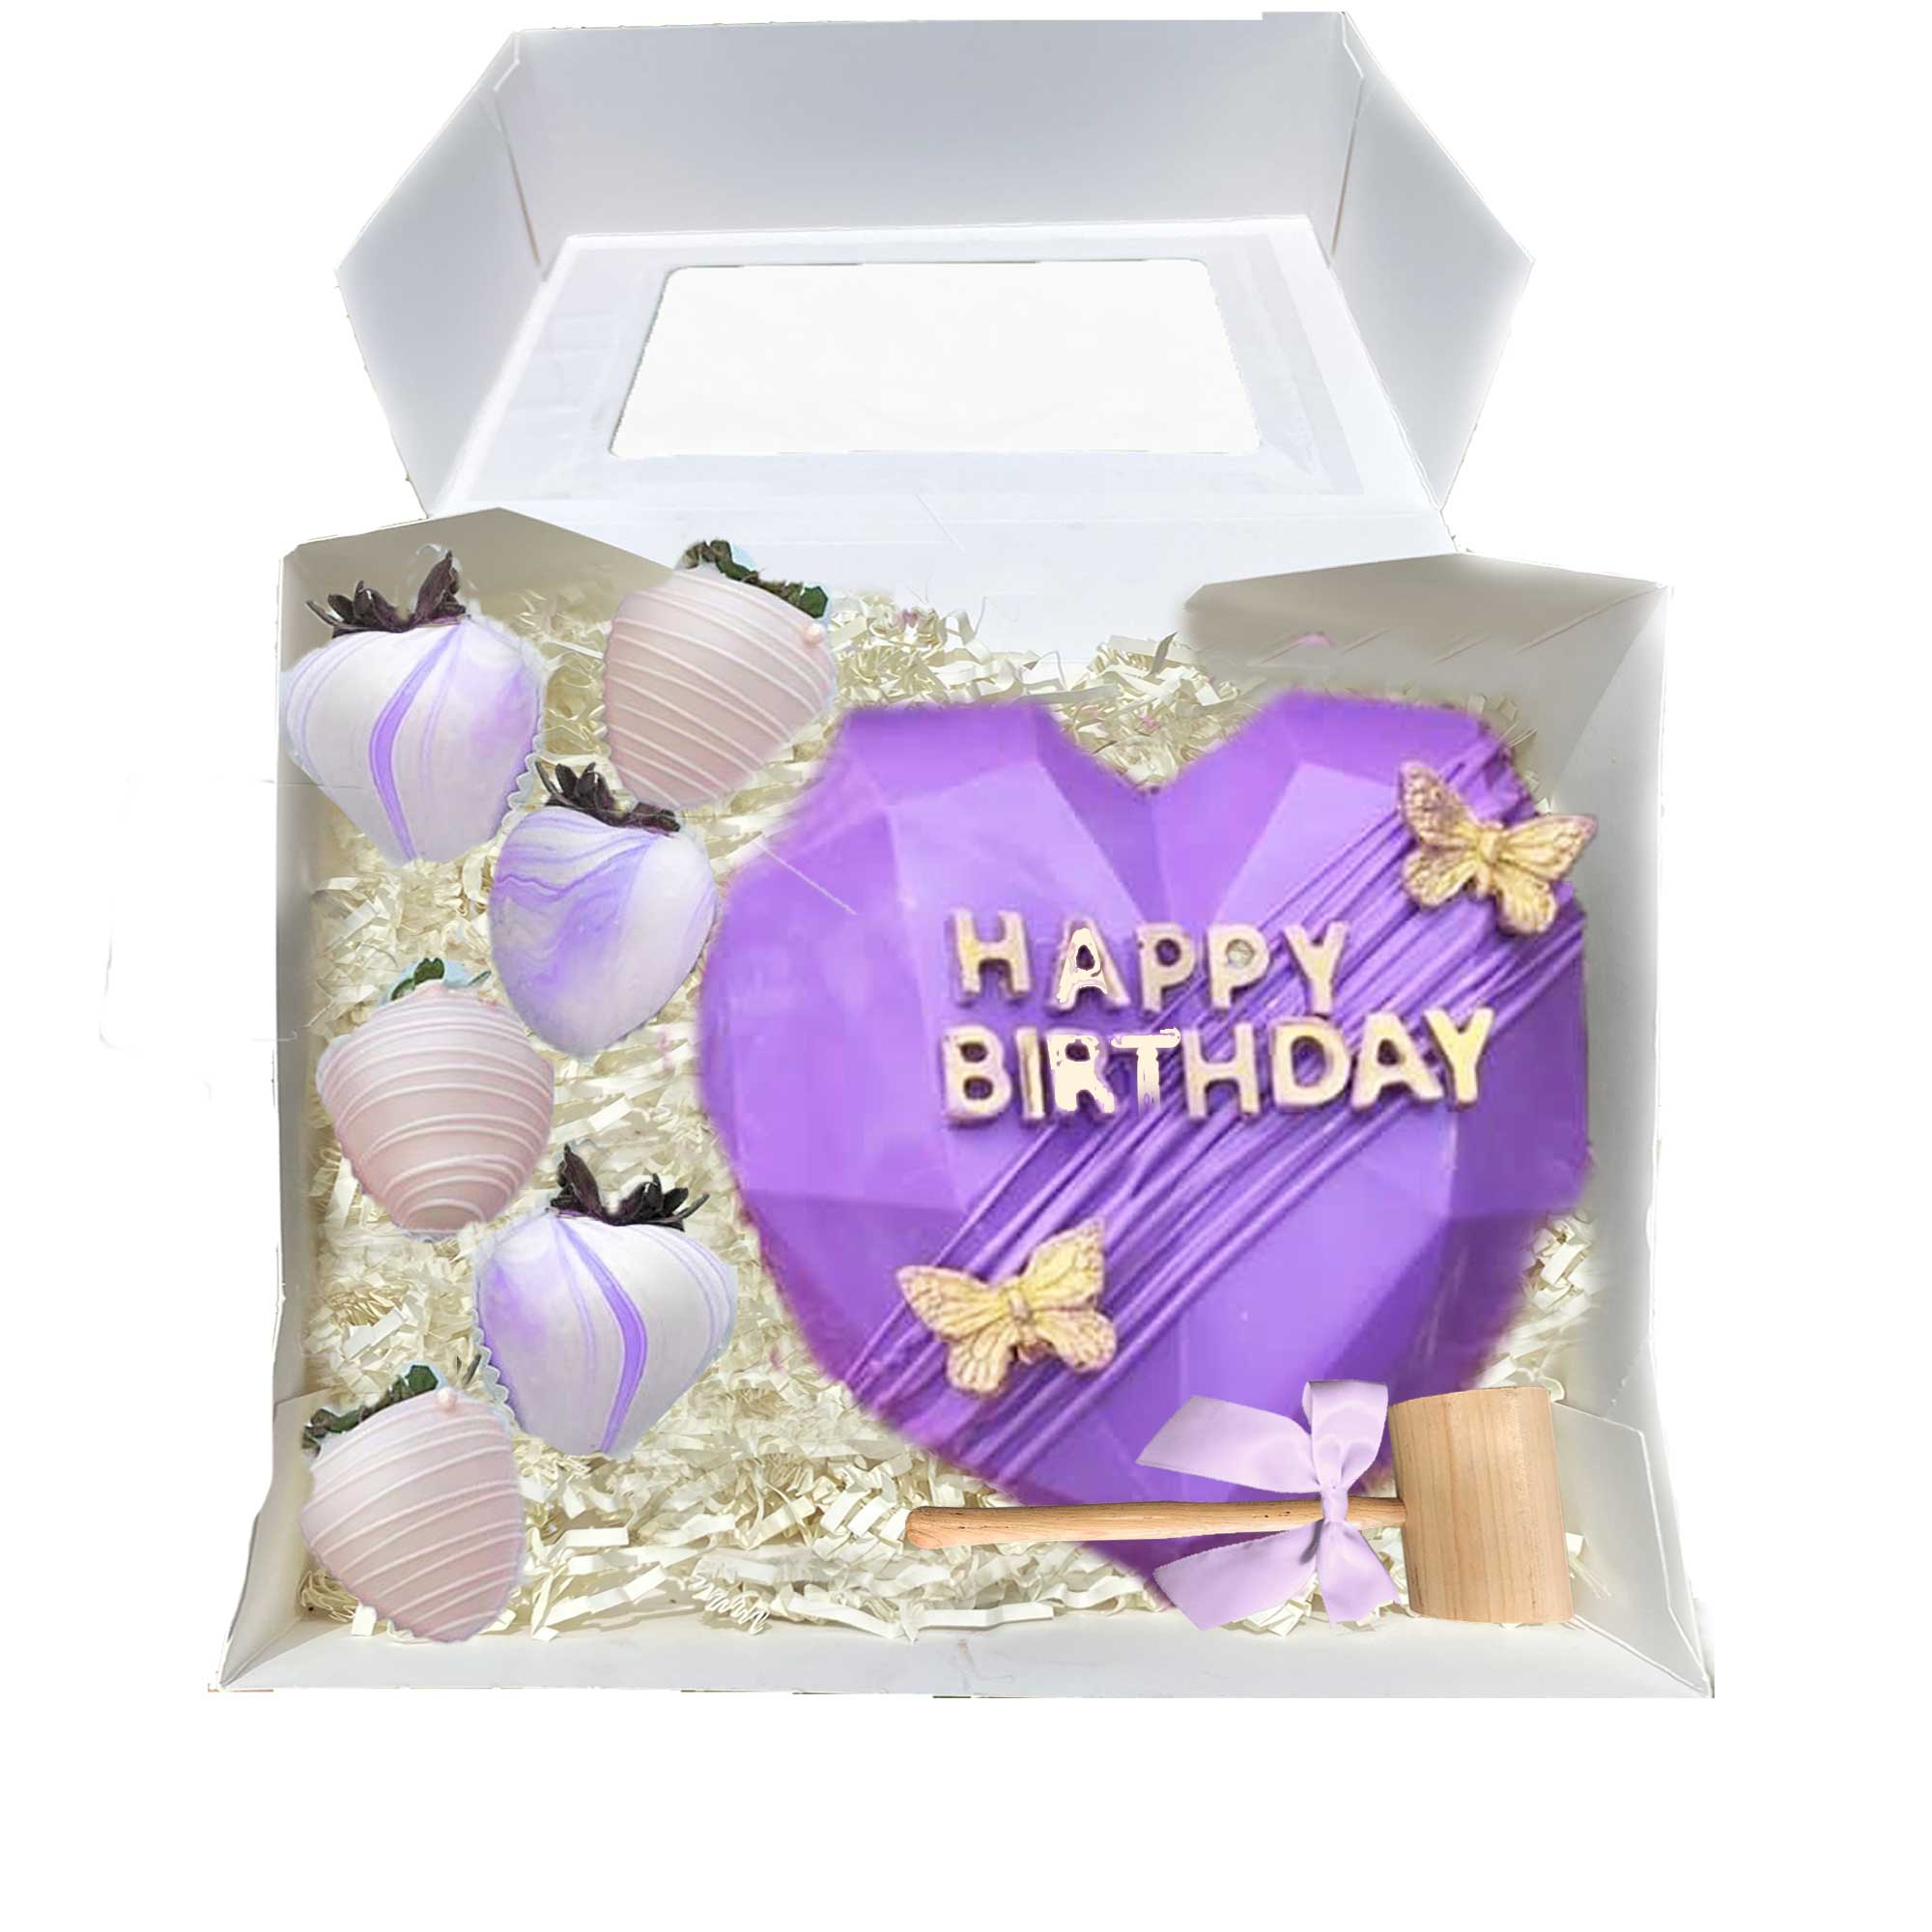 Happy Birthday Chocolate Pizza for Her (Pink & Purple)